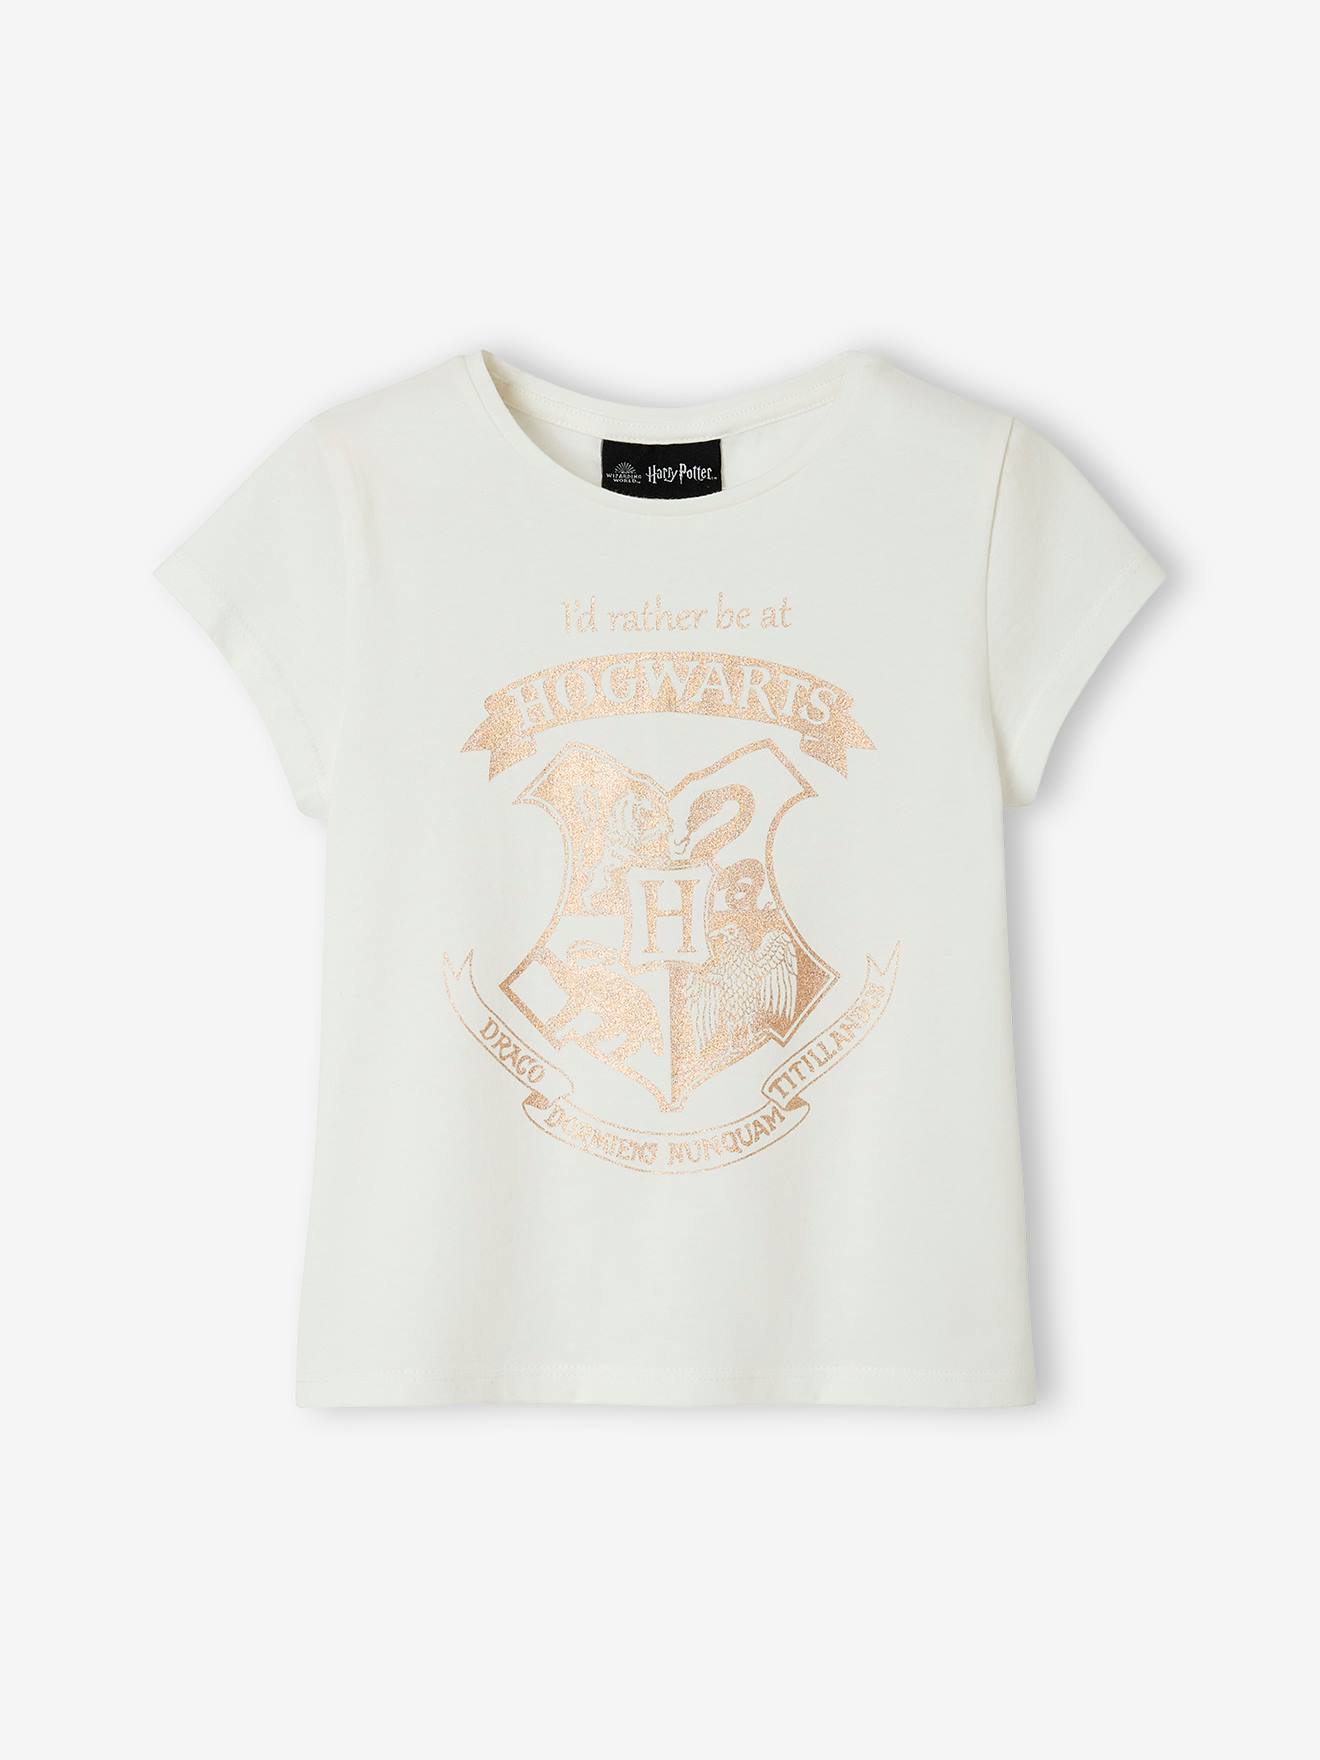 Harry Potter® T-Shirt Girls - white light solid with design,